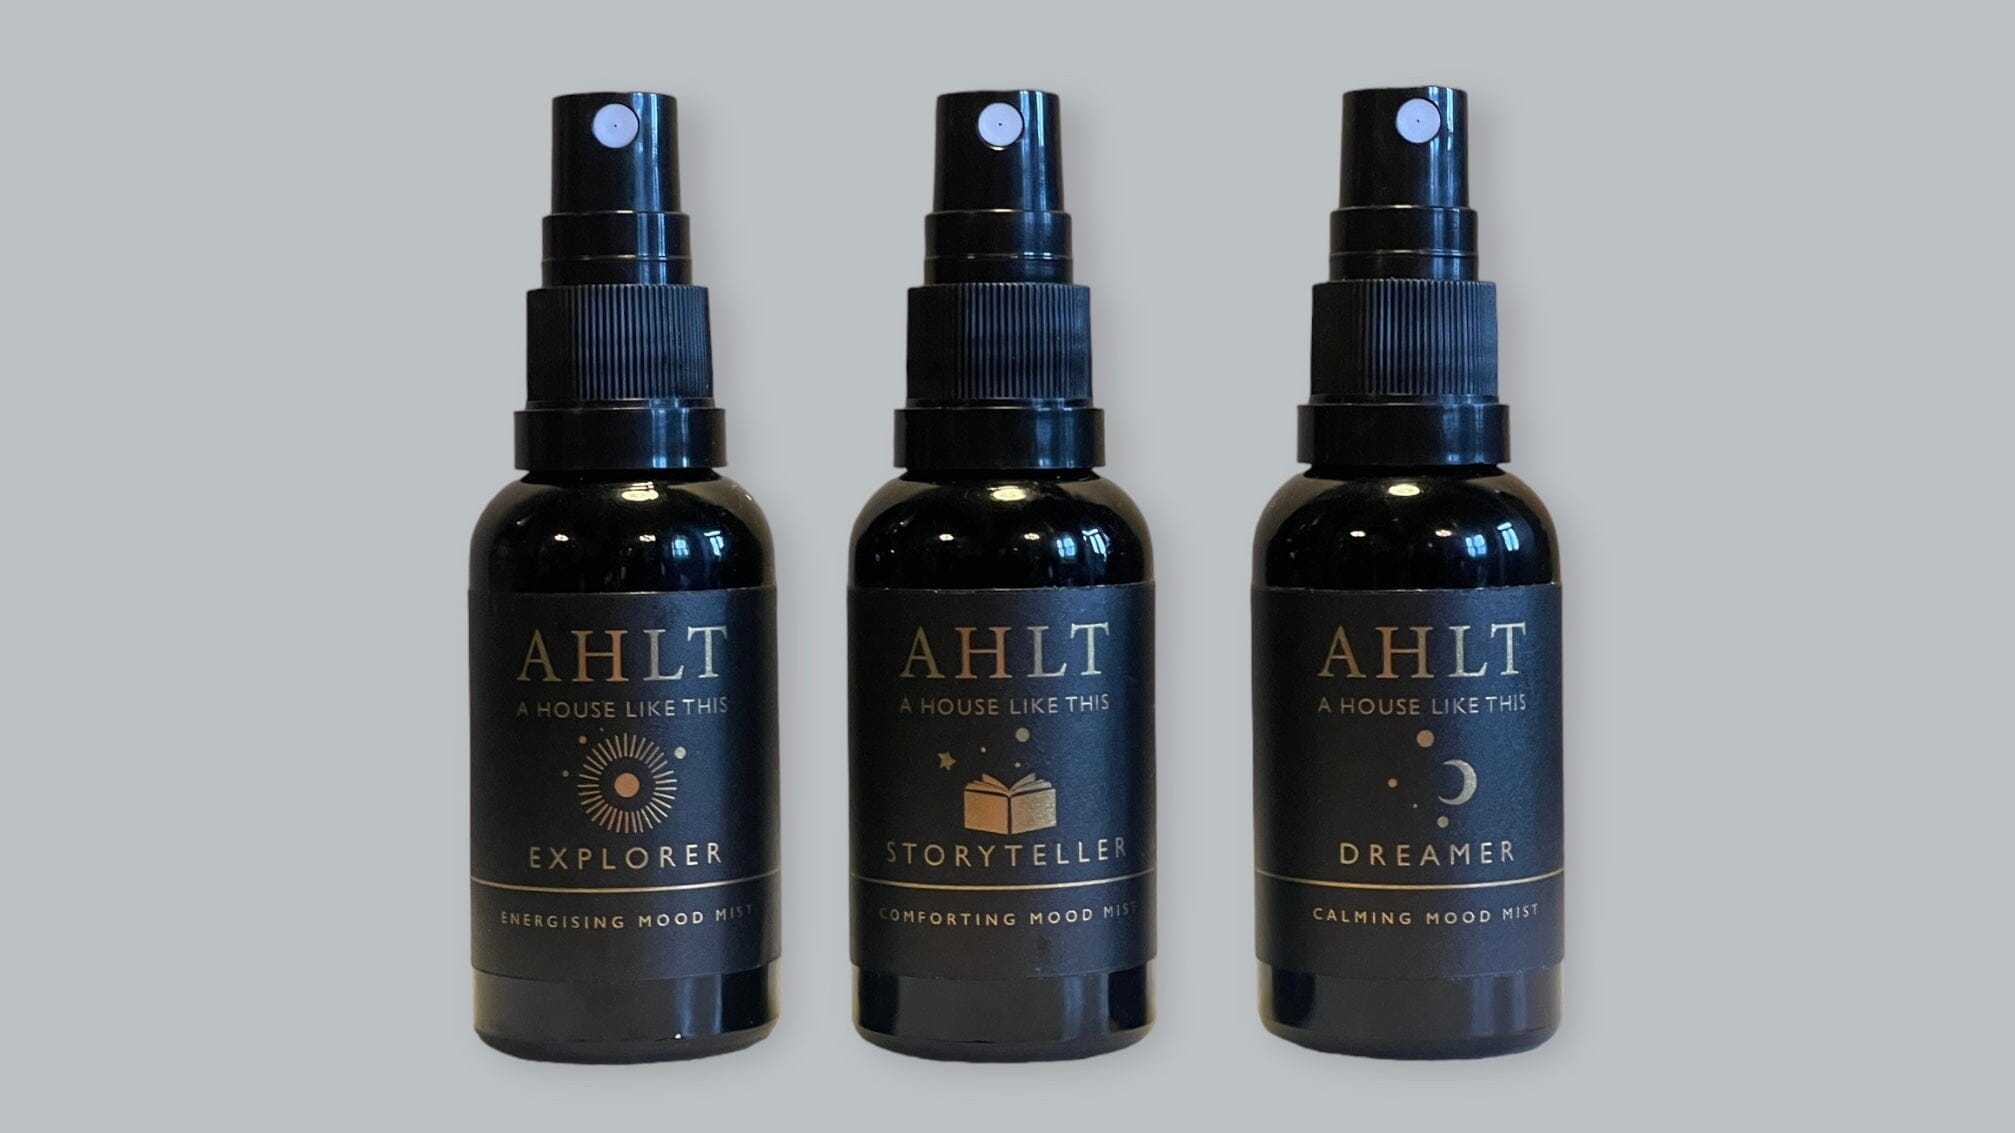 Introducing Aromatherapy Mood Mists